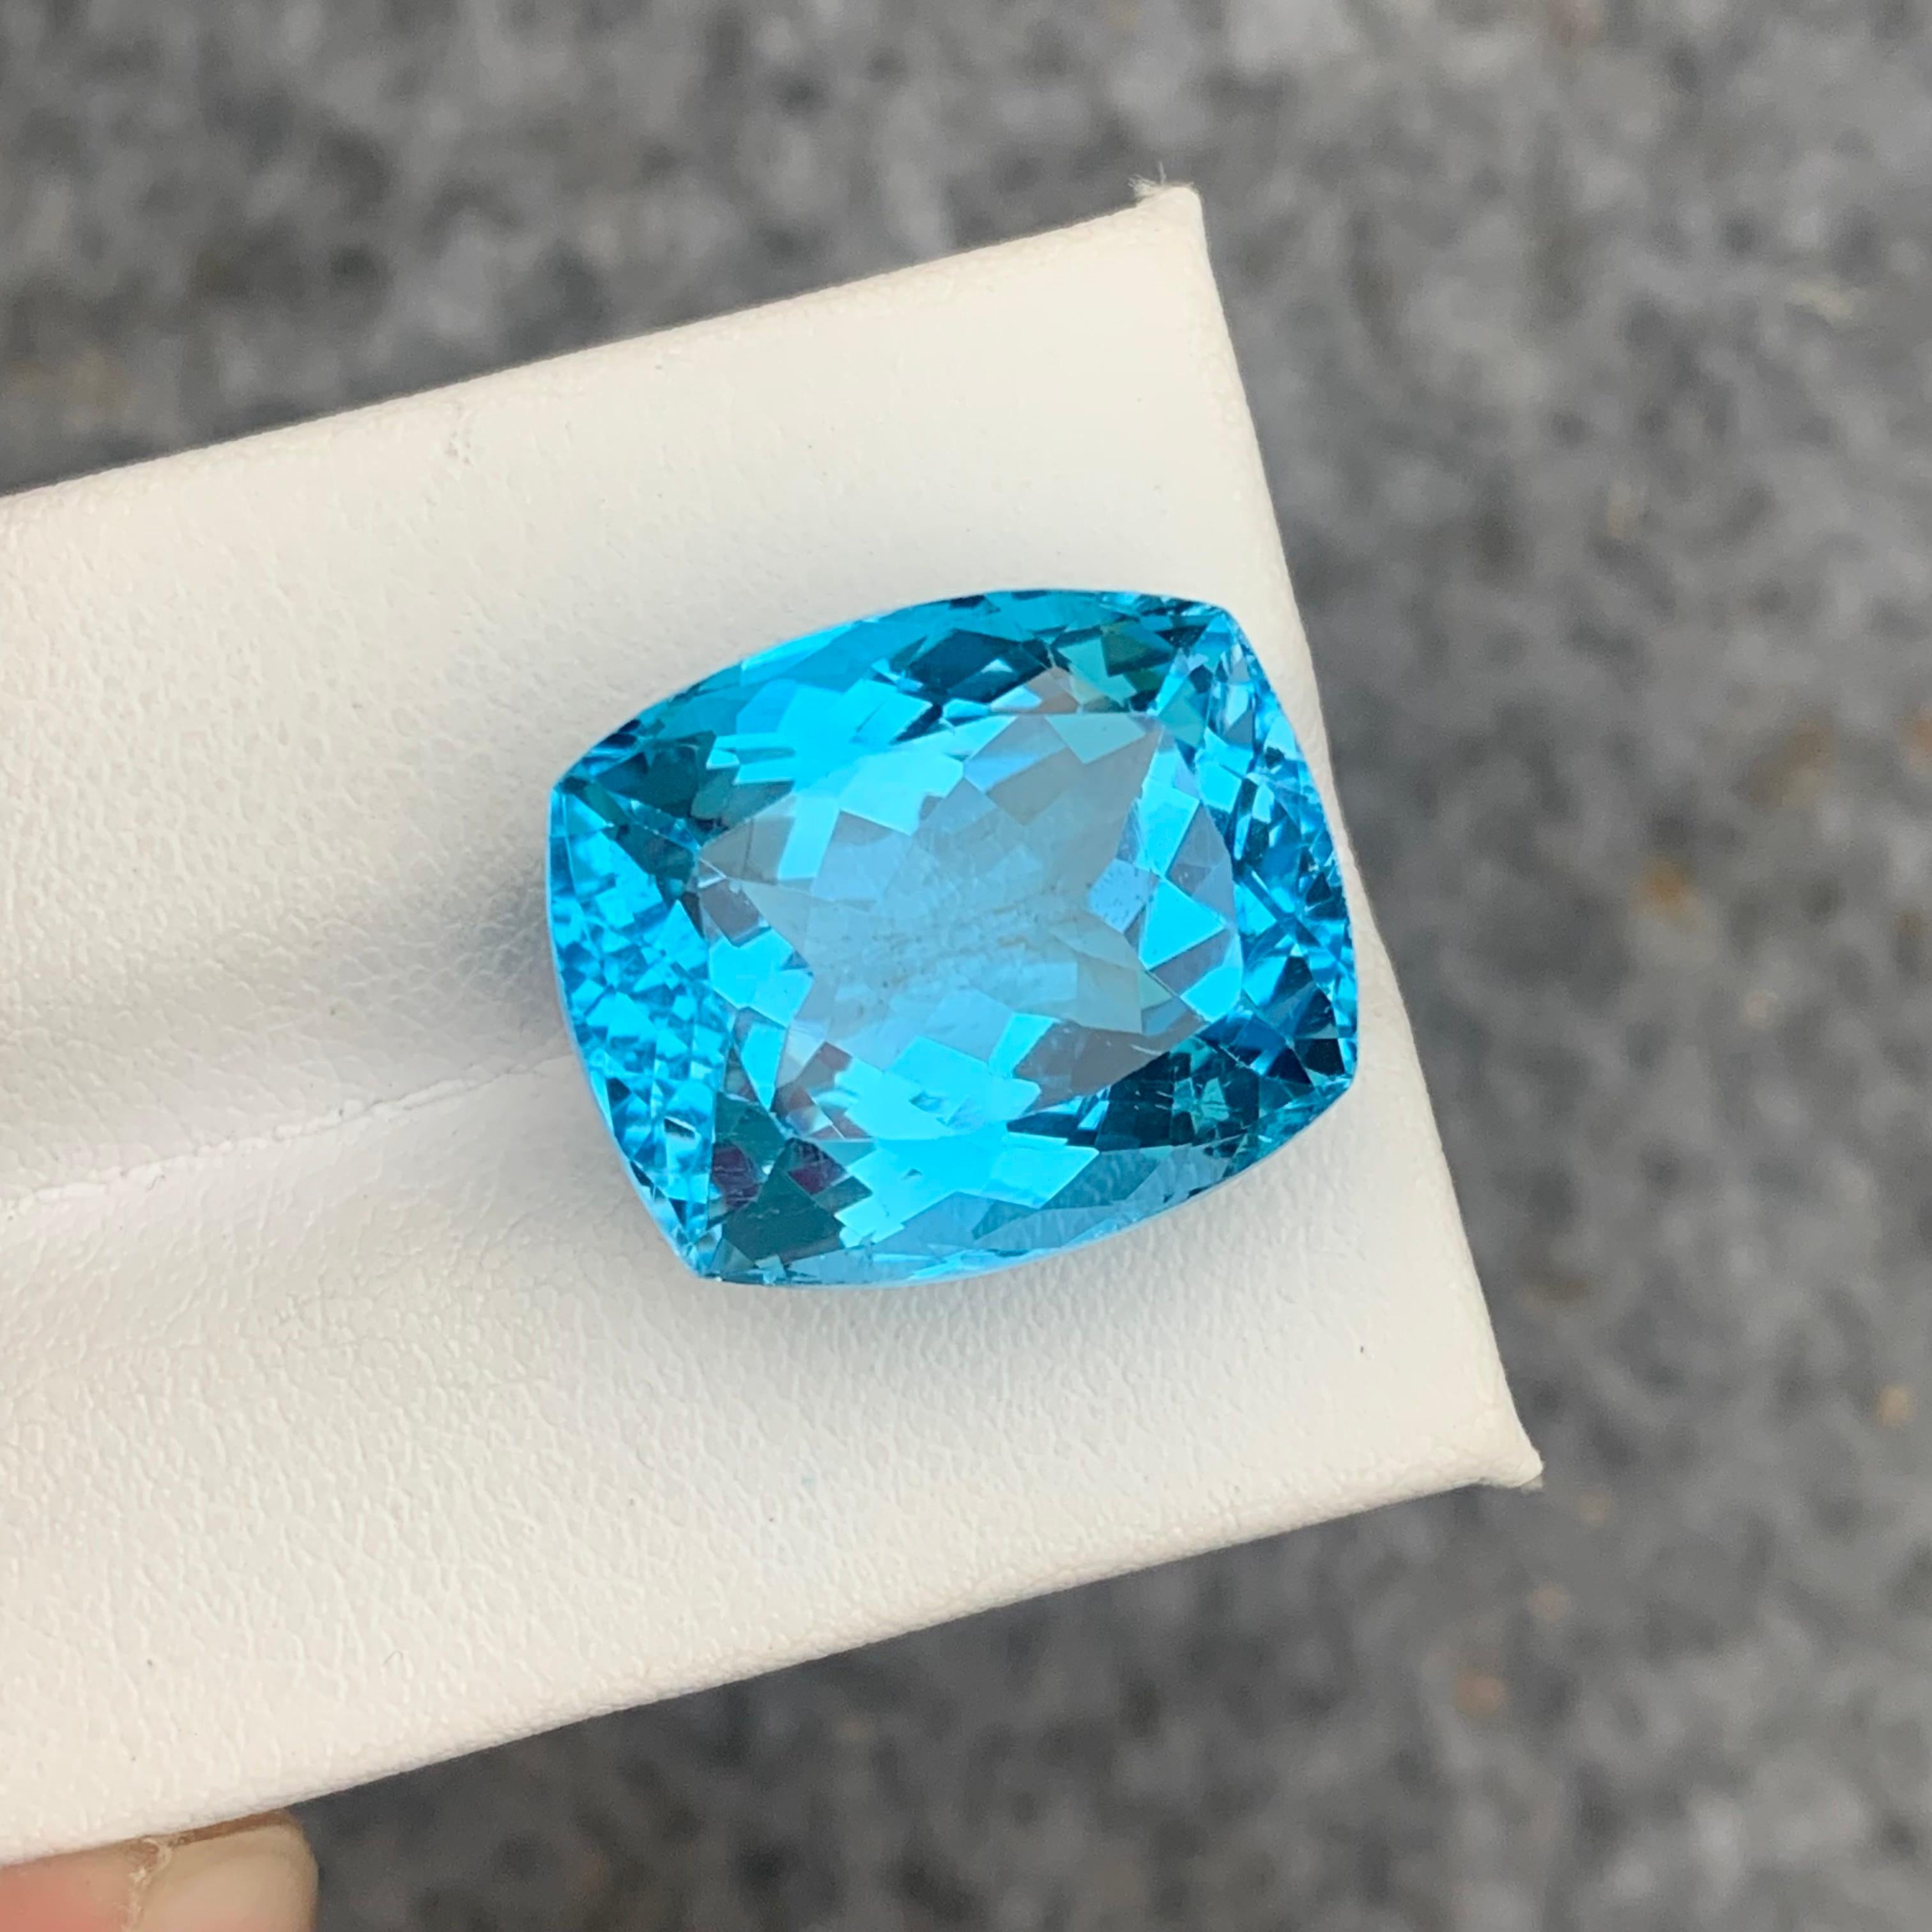 Gorgeous 31.10 Carat Loose Blue Topaz from Brazil Long Cushion Cut for Jewelry 2